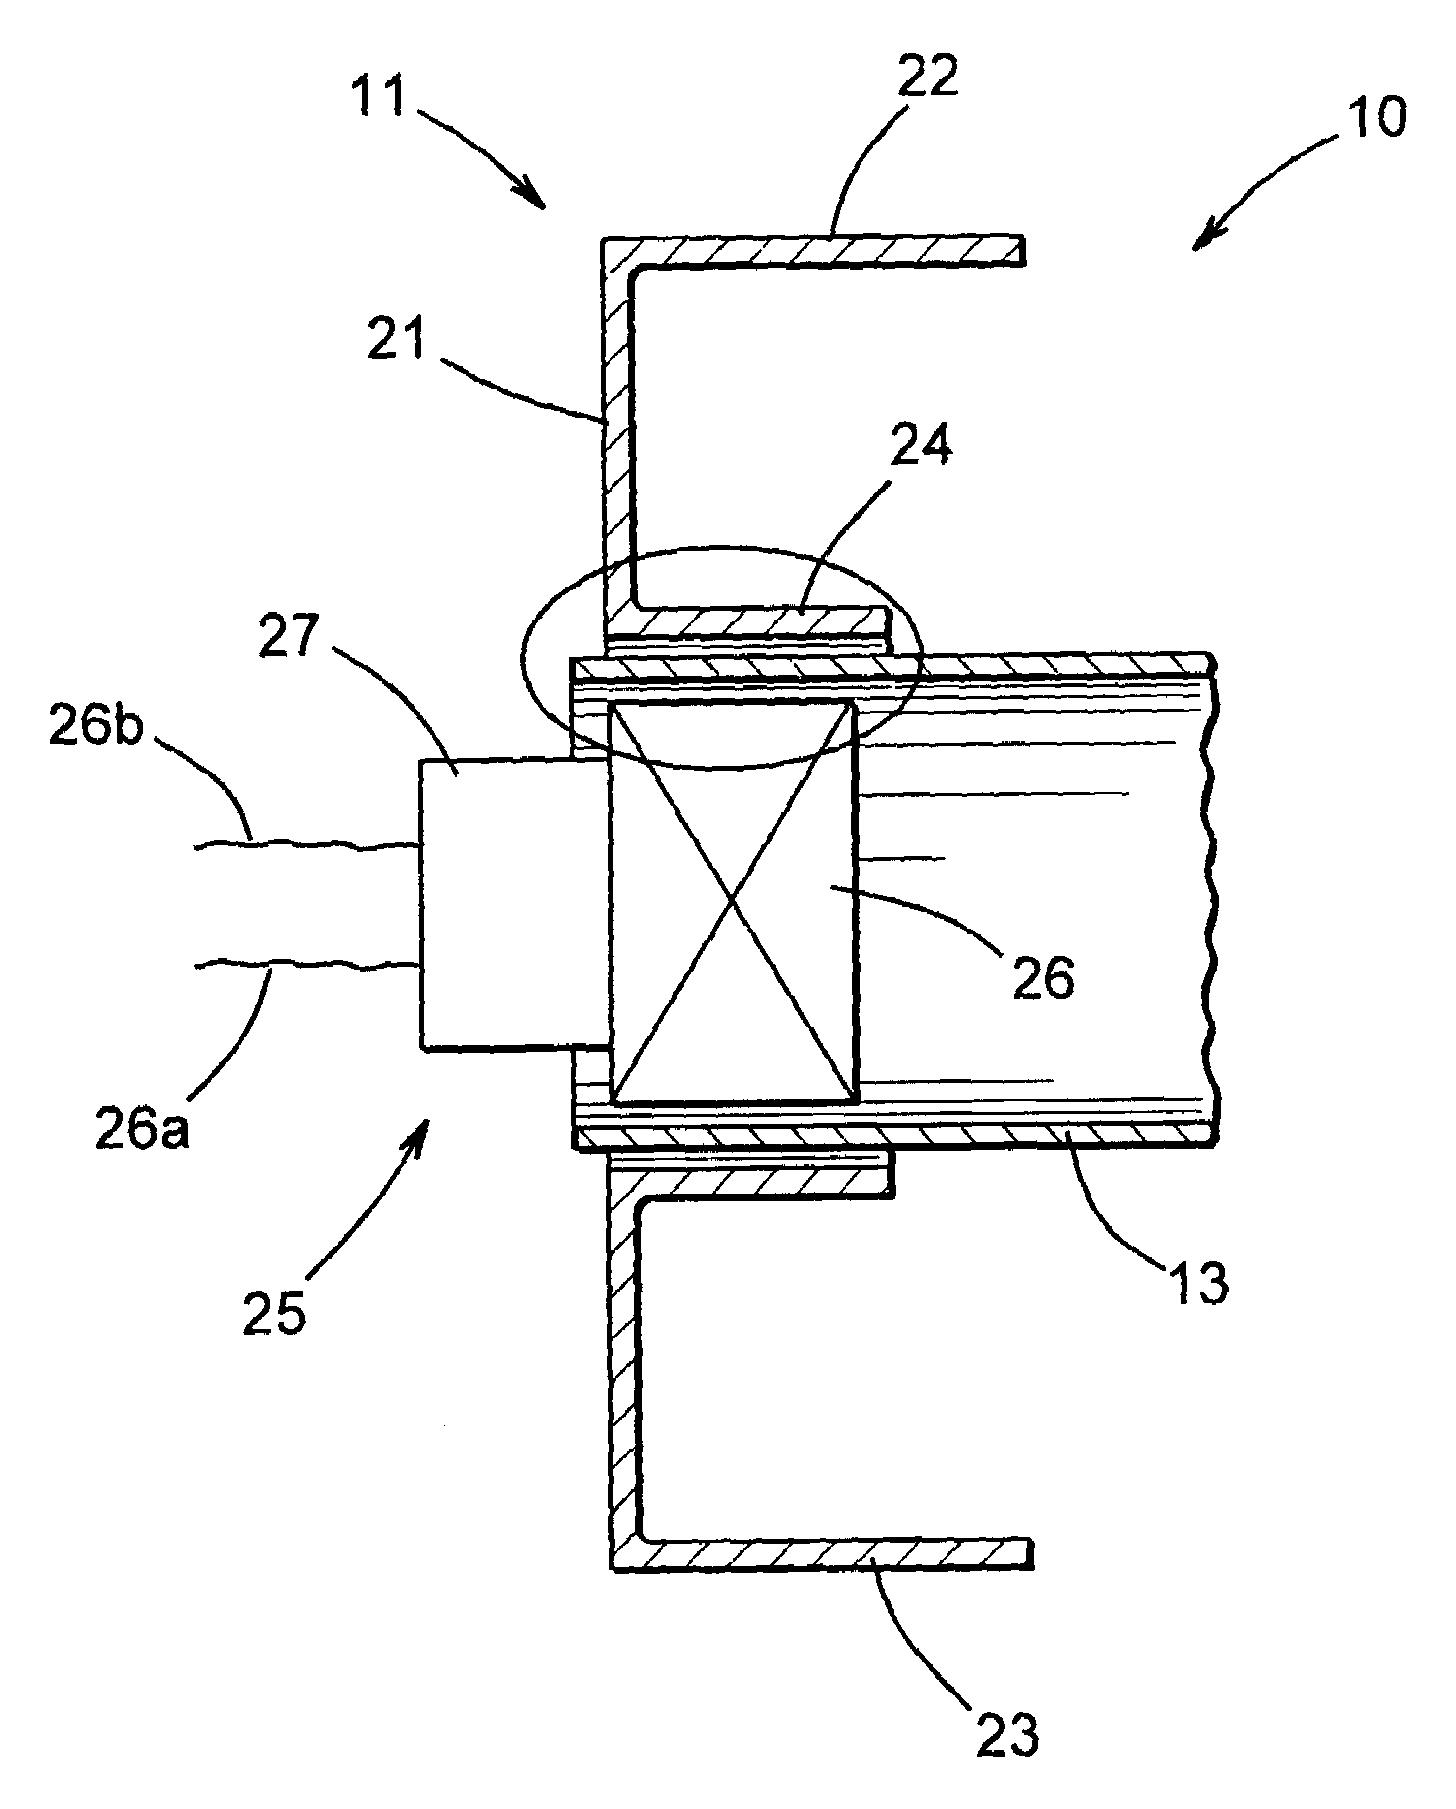 Method and apparatus for performing a magnetic pulse welding operation